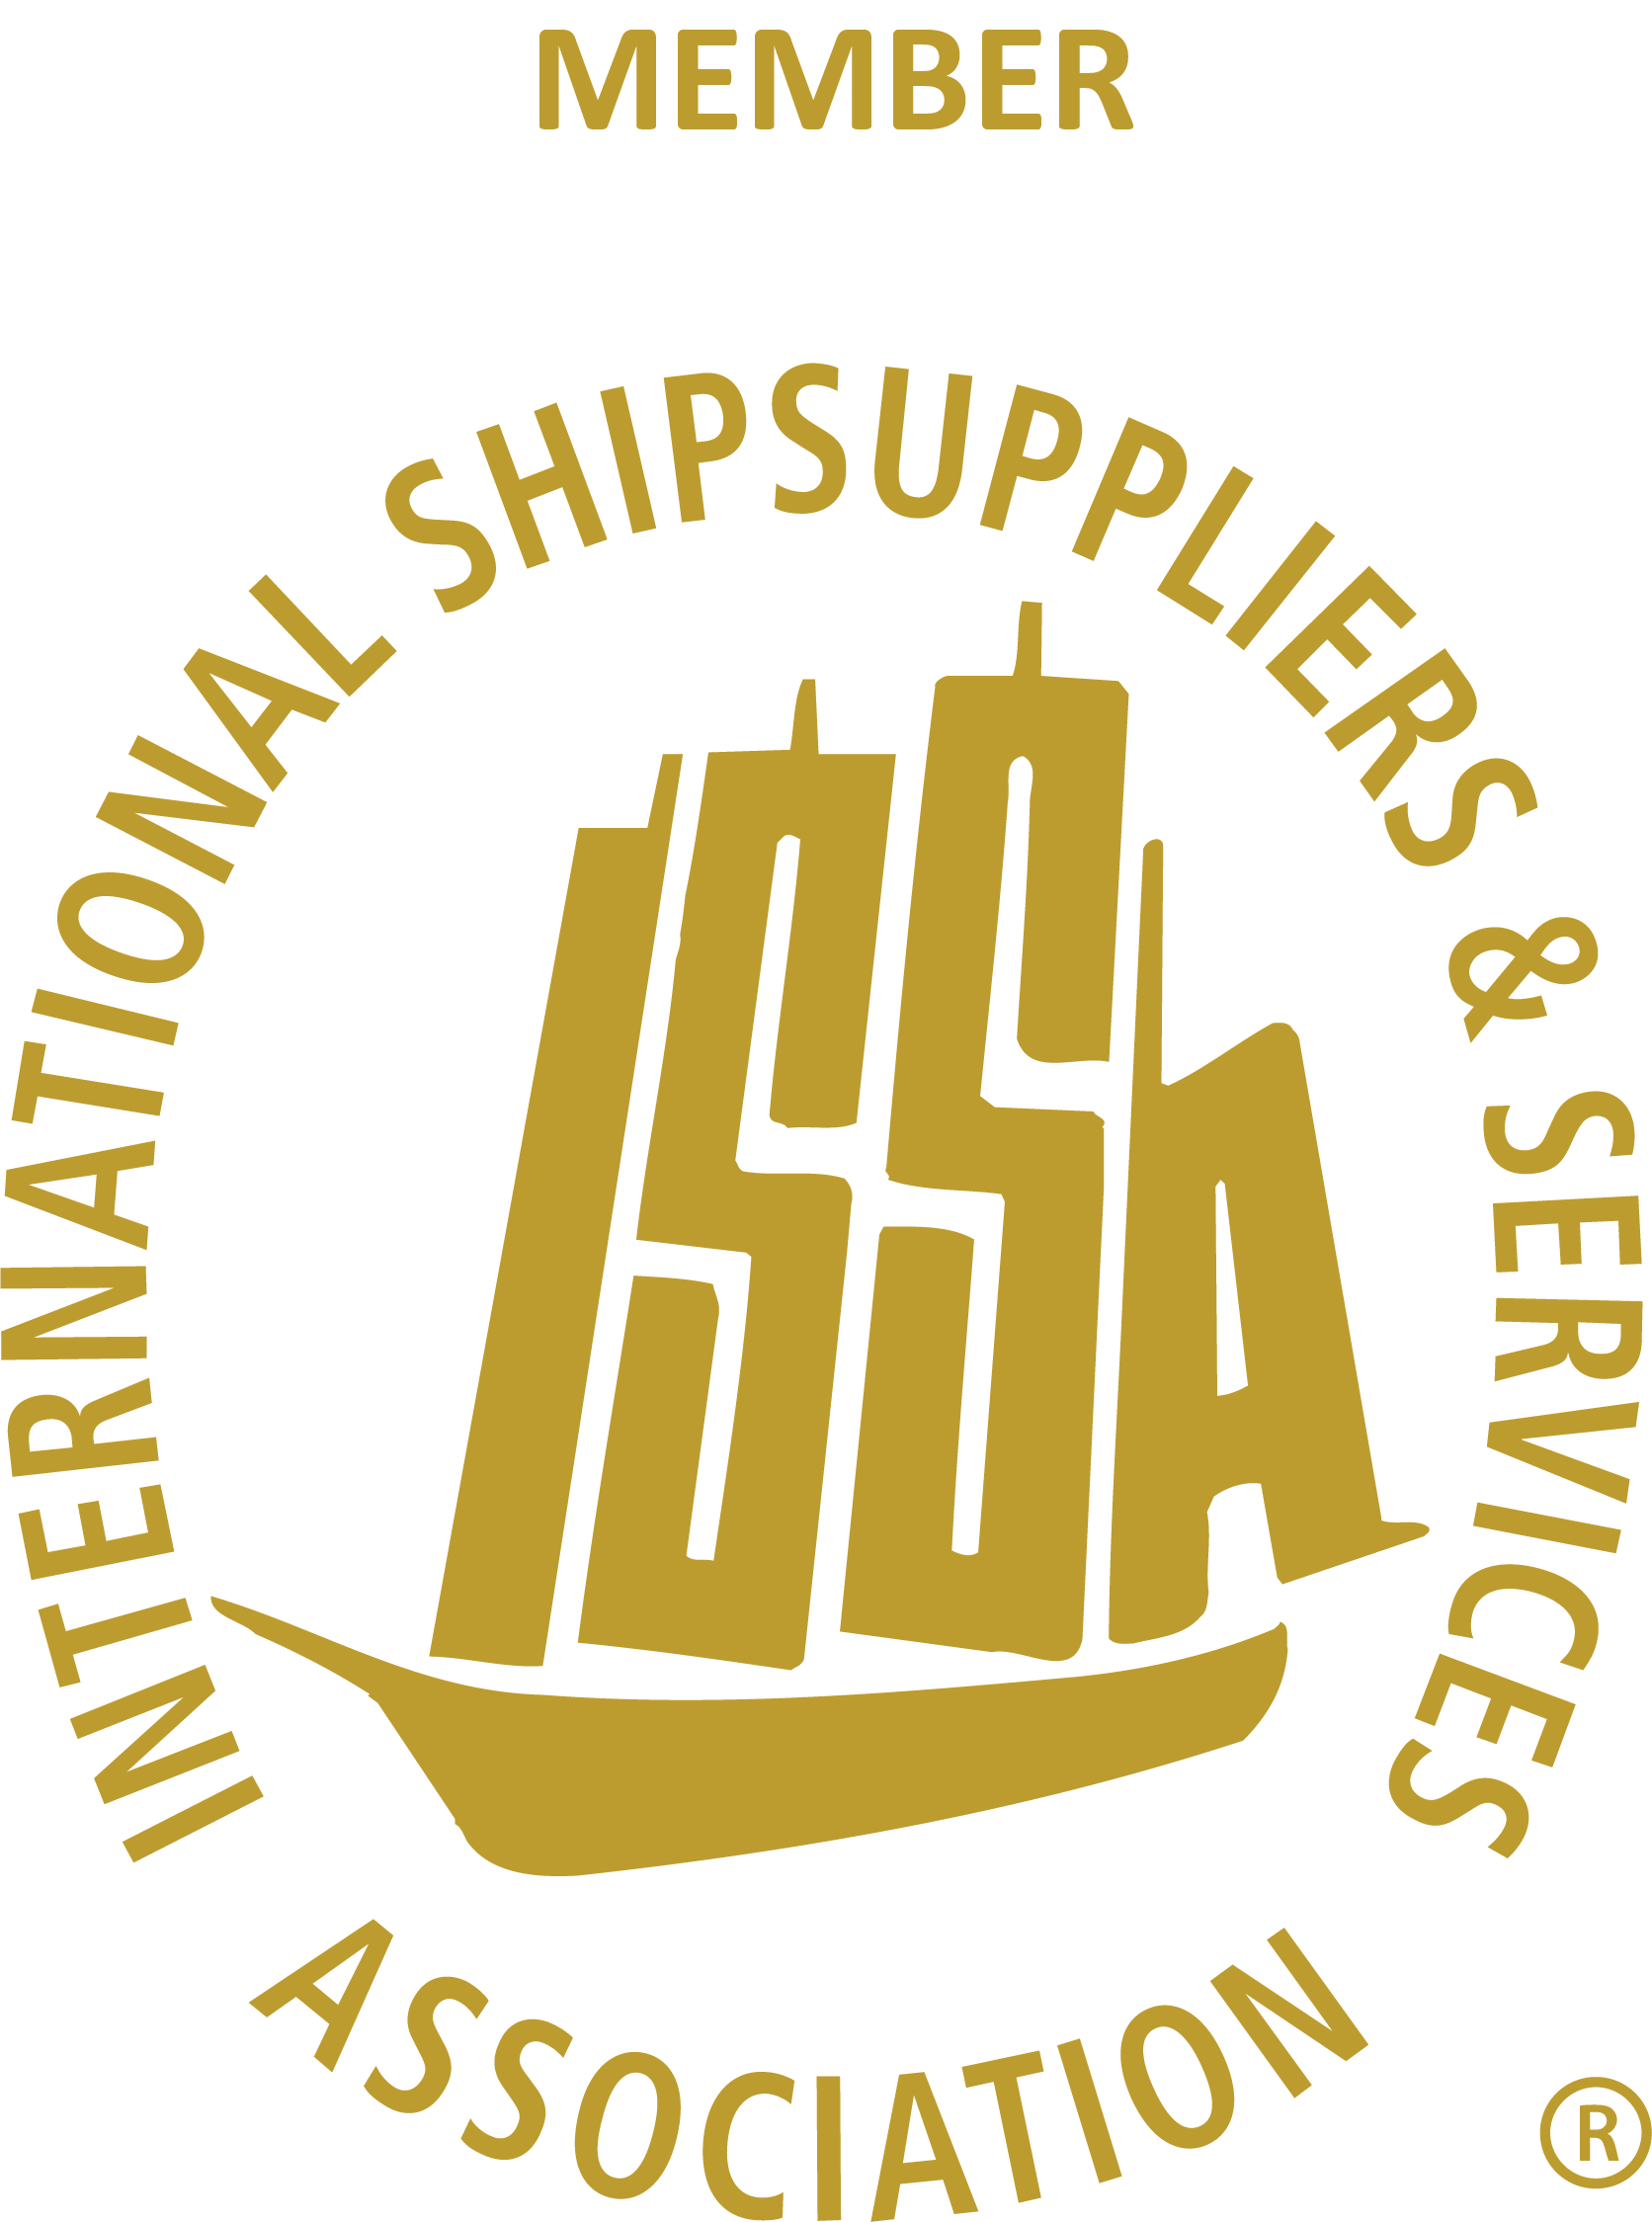 Sovereign Logistics Ltd is a member of the International Ship Suppliers and Services Association.